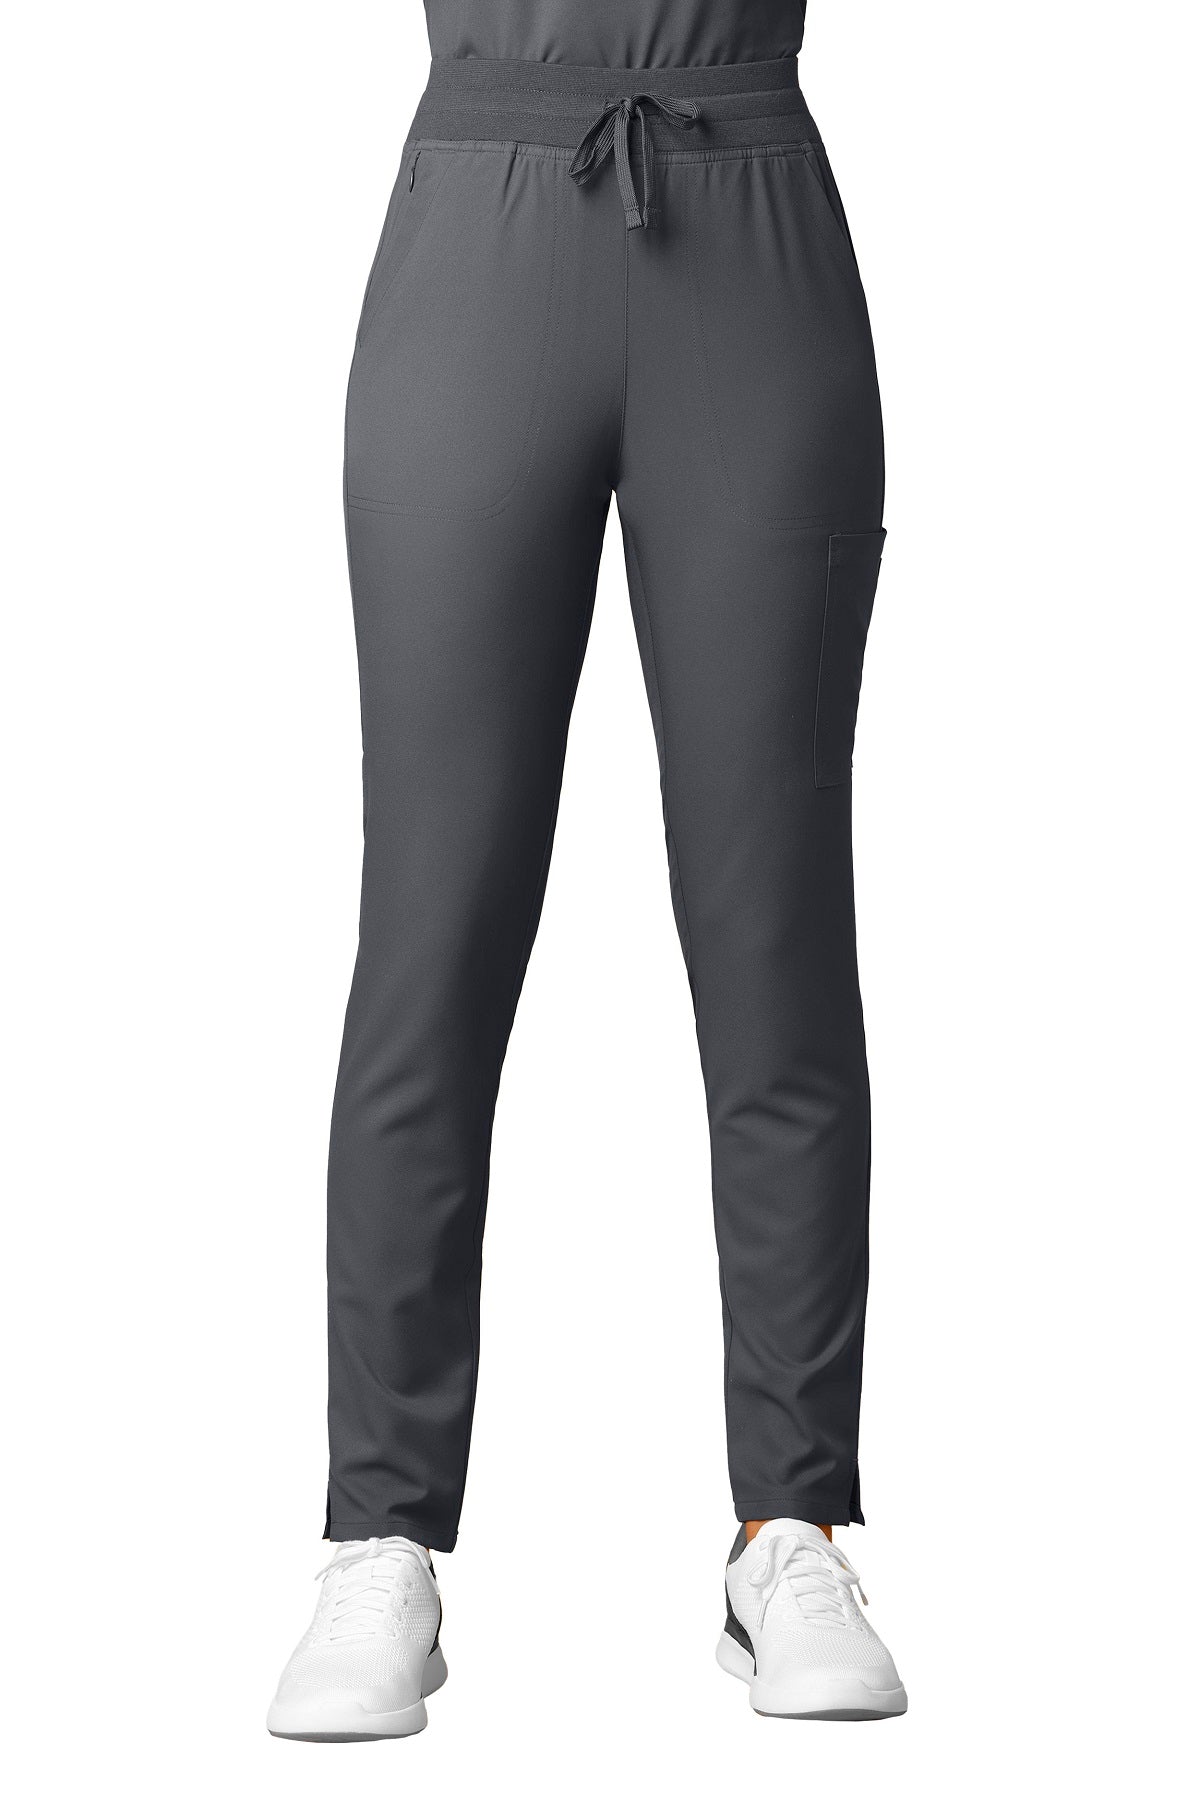 WonderWink Scrub Pants Thrive Cargo Straight Slim regular length in pewter at Parker's Clothing and Shoes.